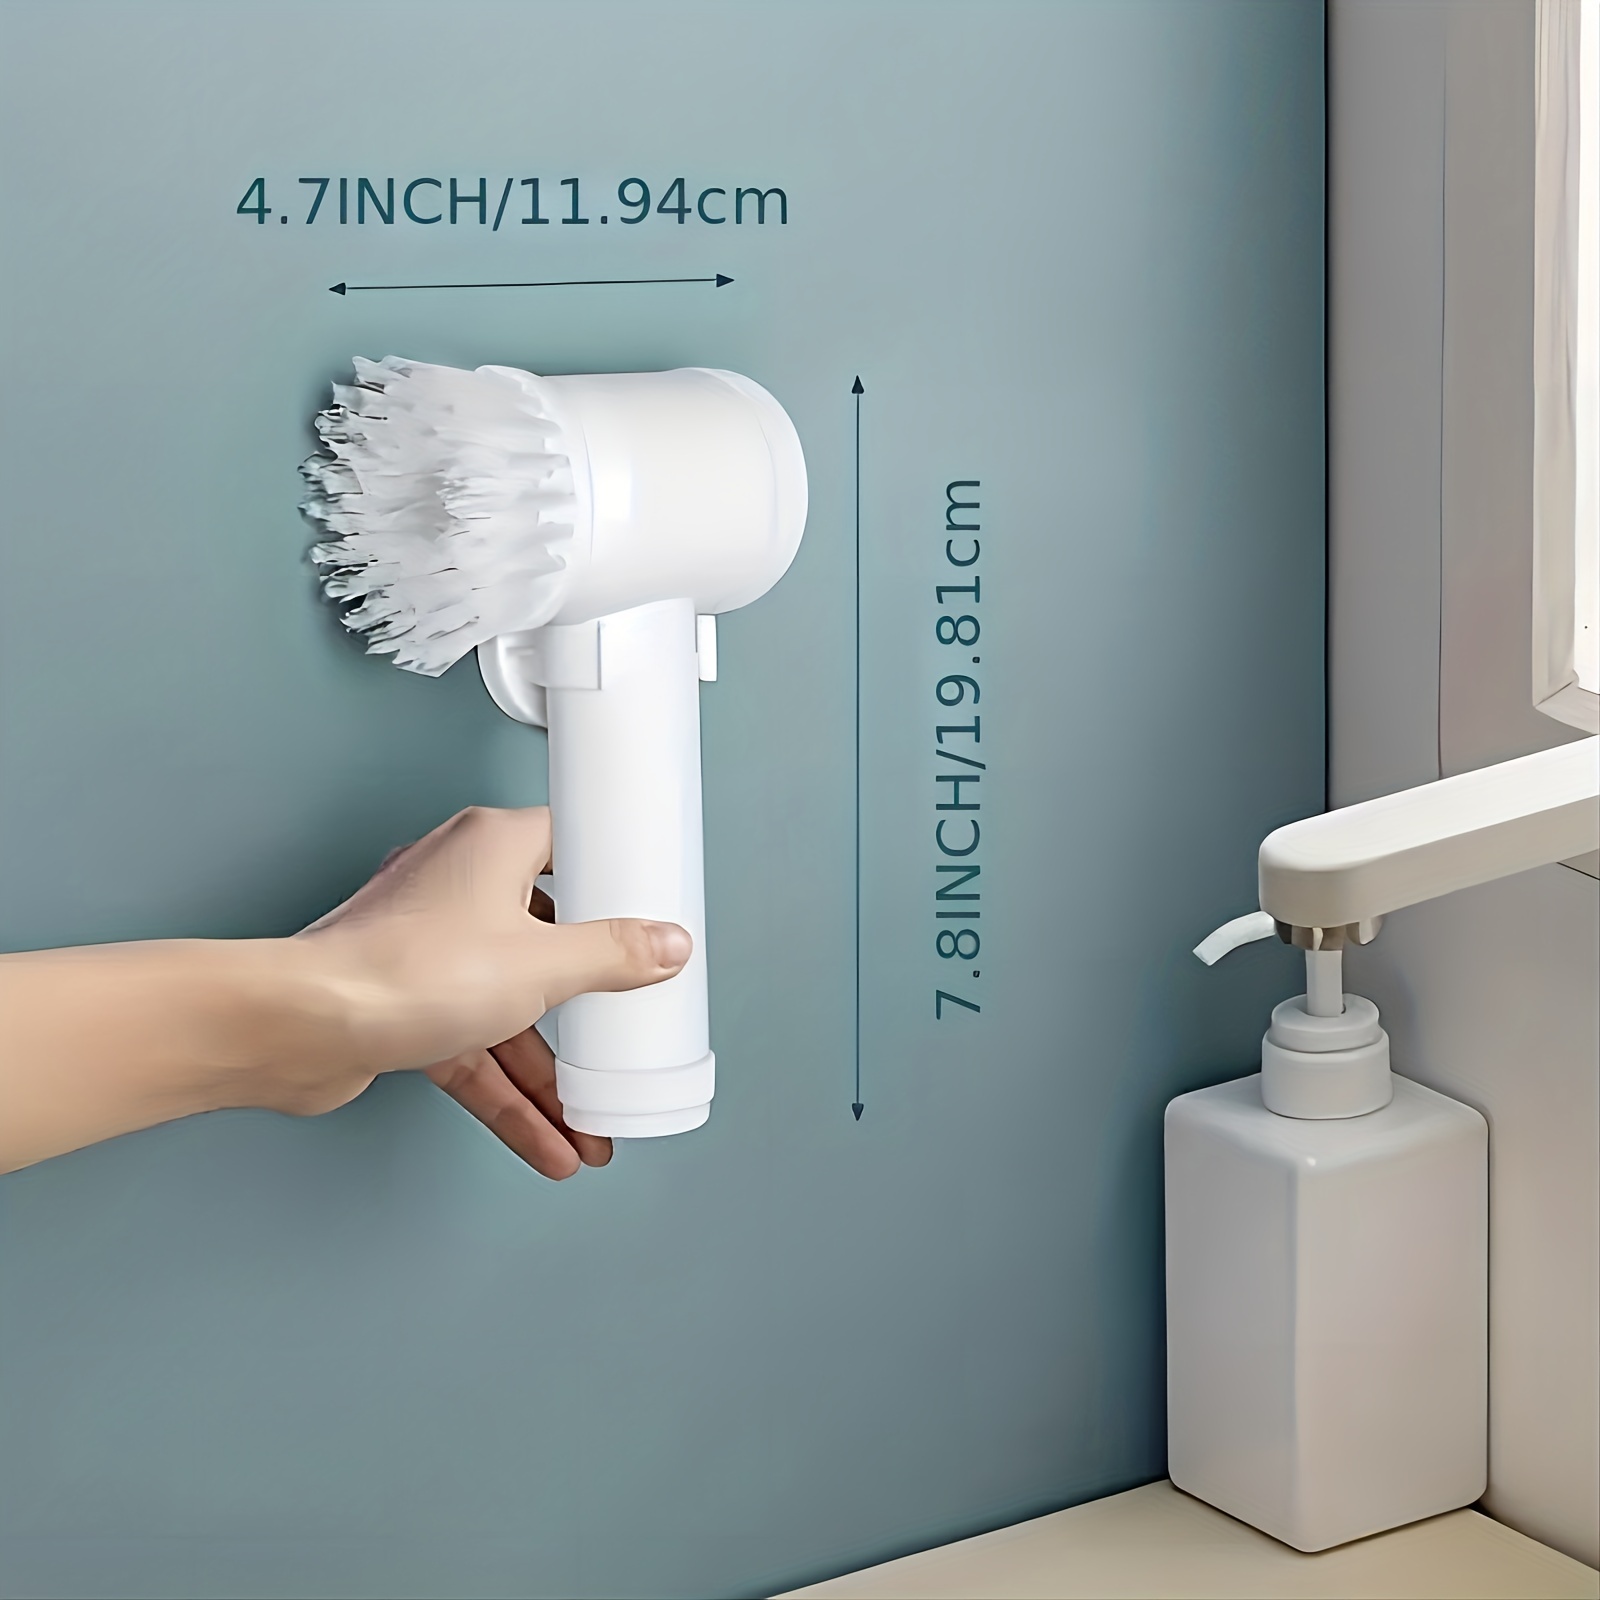 Electric Spin Scrubber Cleaning Brush for Tile, Tub, Sink, Wall, Bathroom